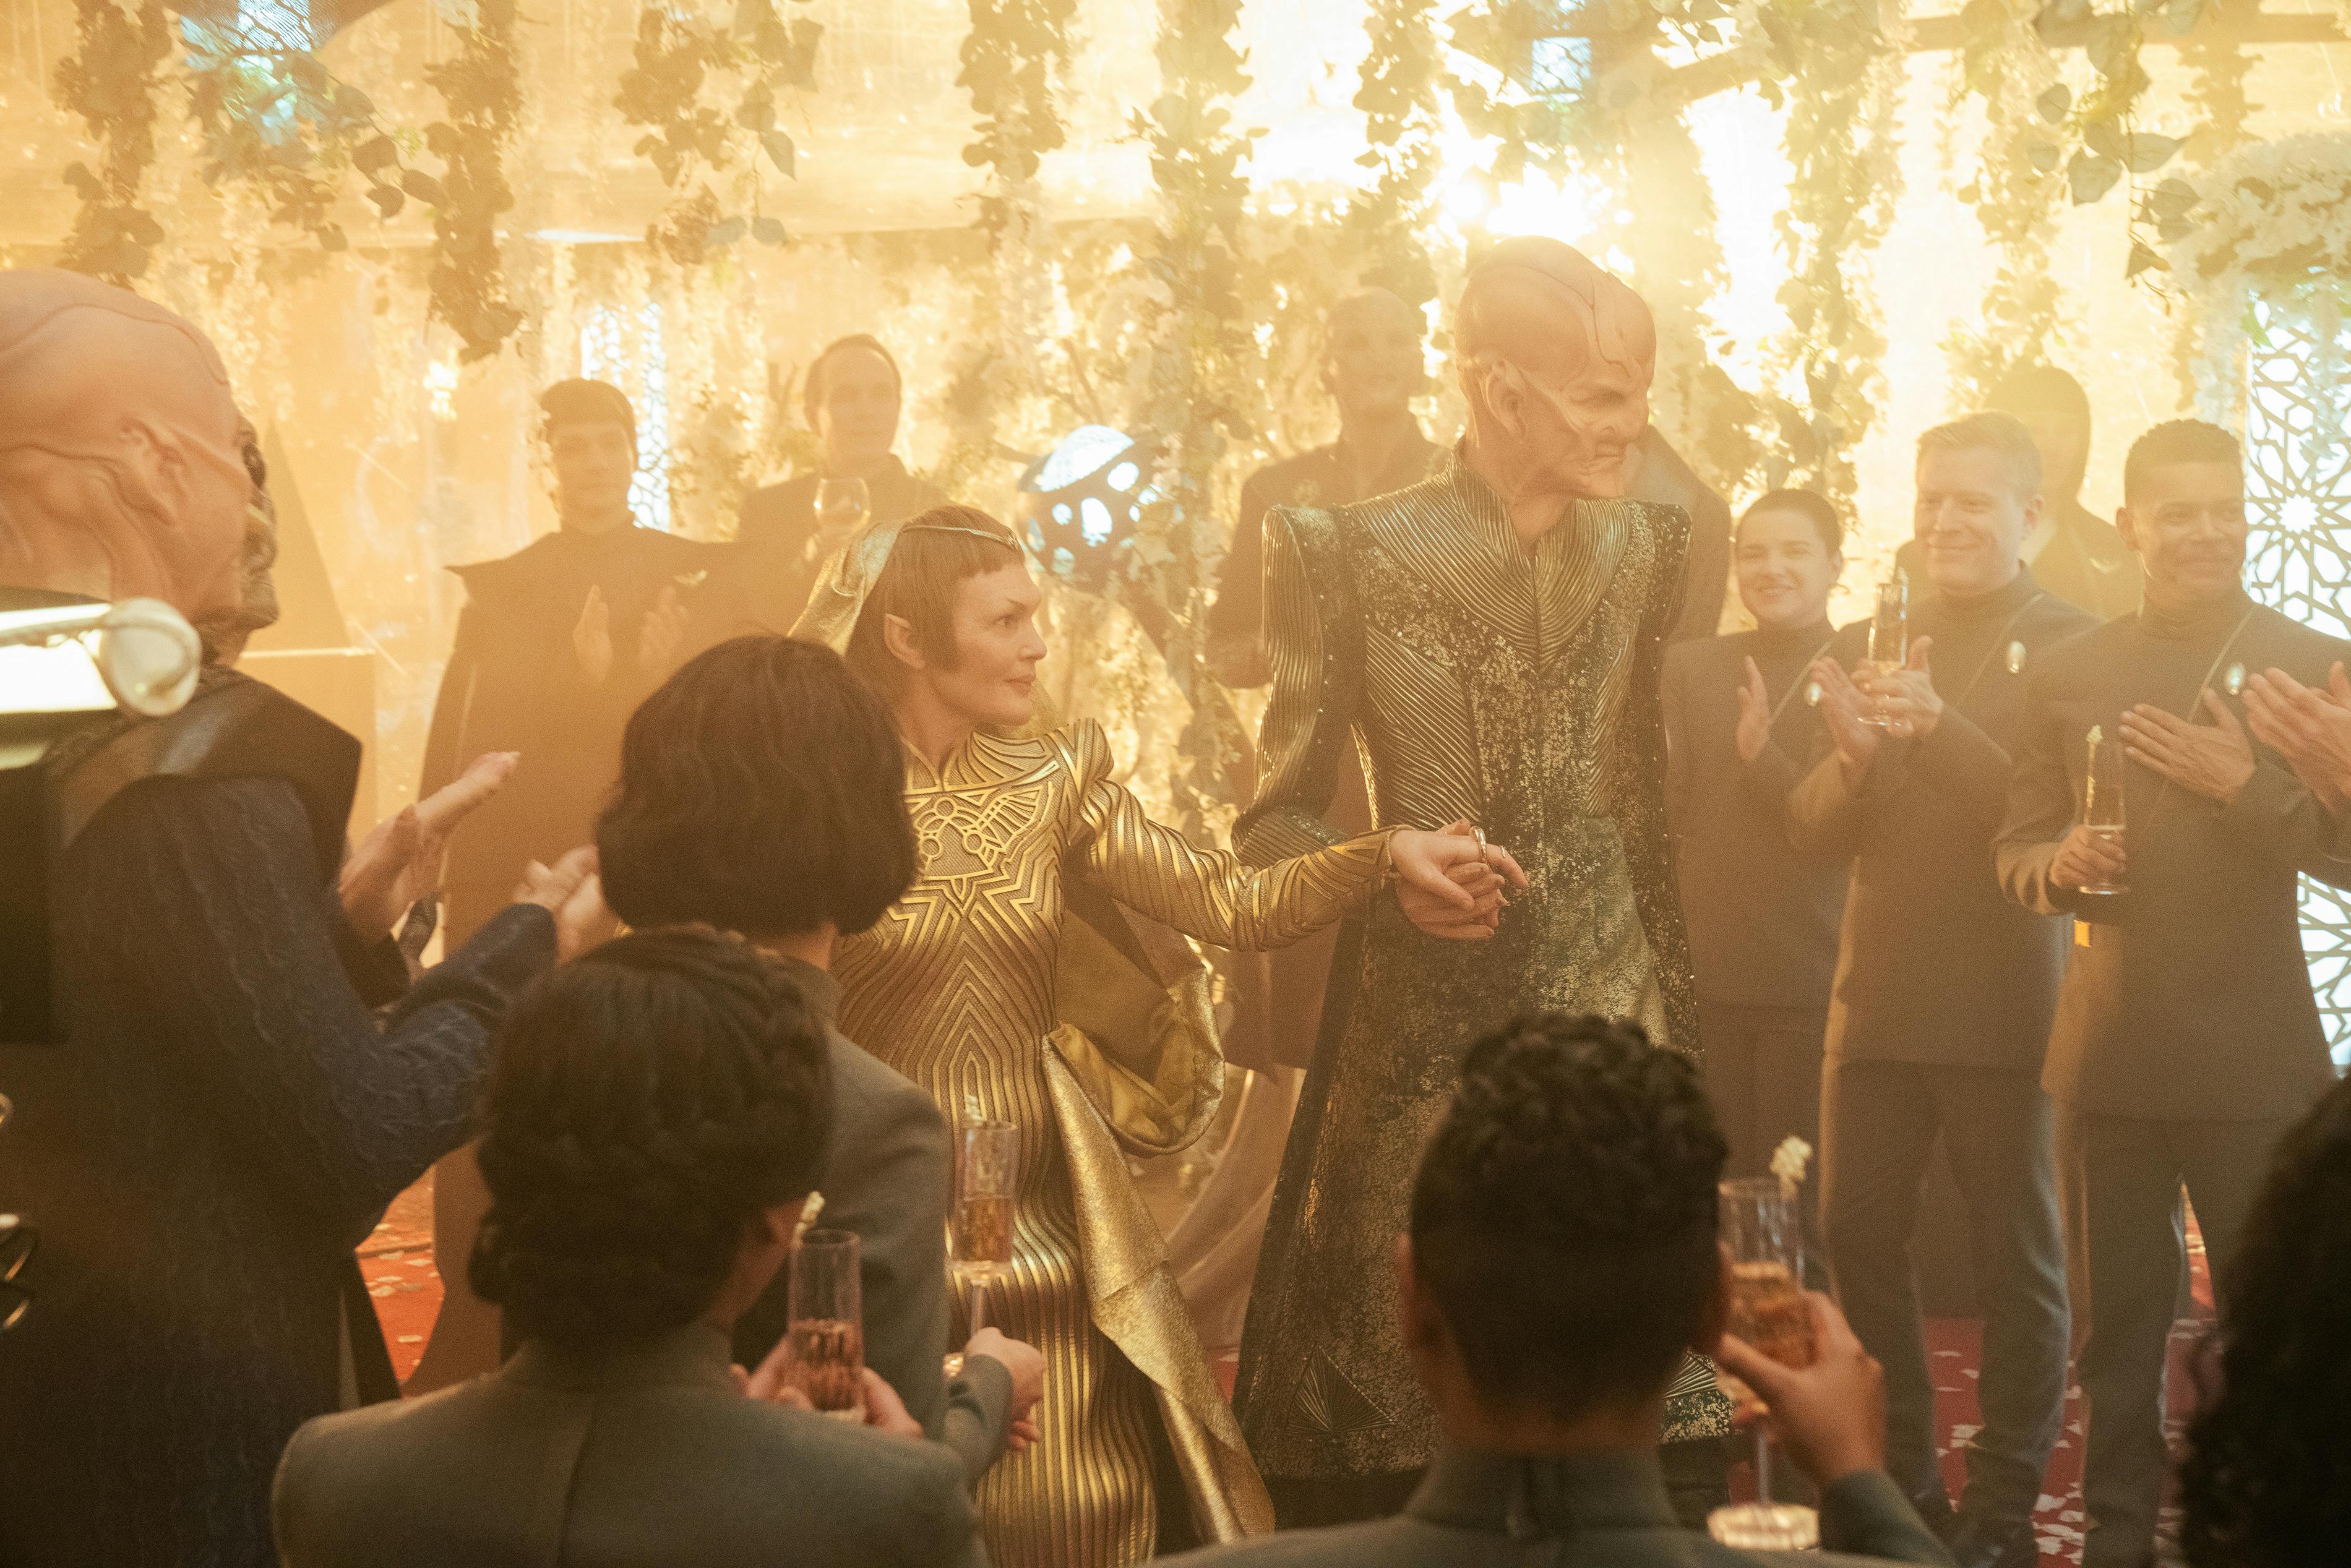 Behind-the-scenes of Saru and T'Rina's wedding as he leads her into the room with all the guests surrounding them raising glasses and clapping in 'Life, Itself'